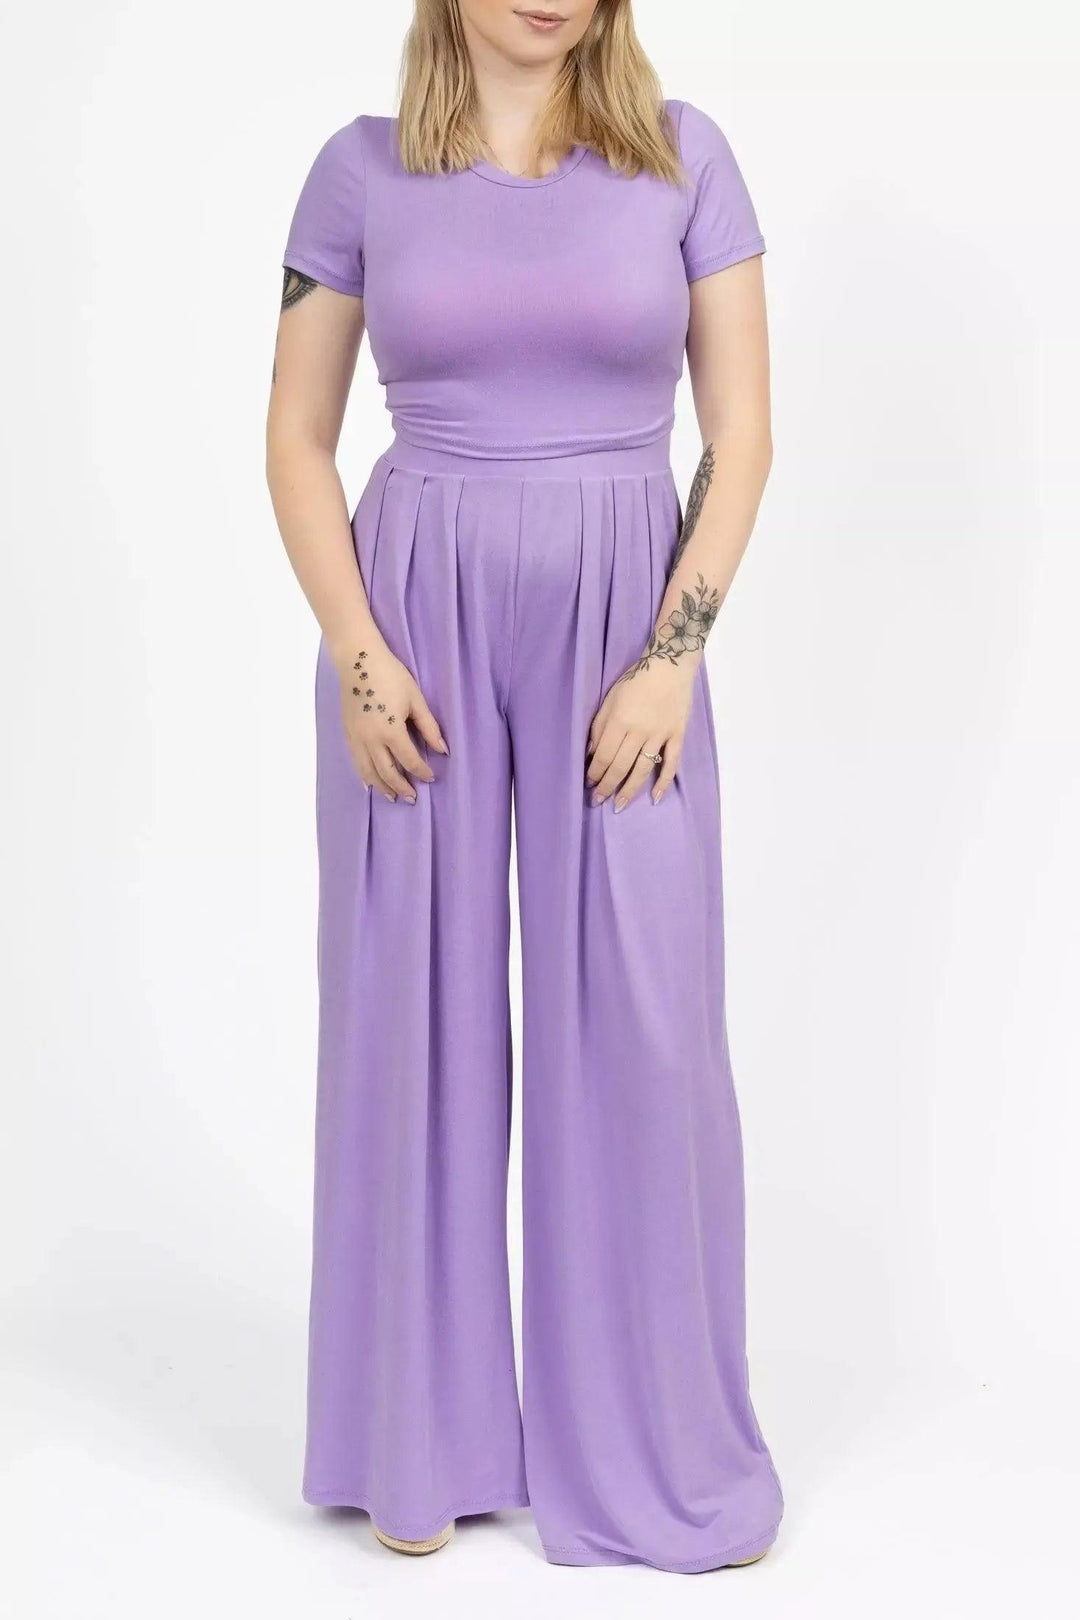 Crop Top and Wide Leg Palazzo Pants Set Outfit Set